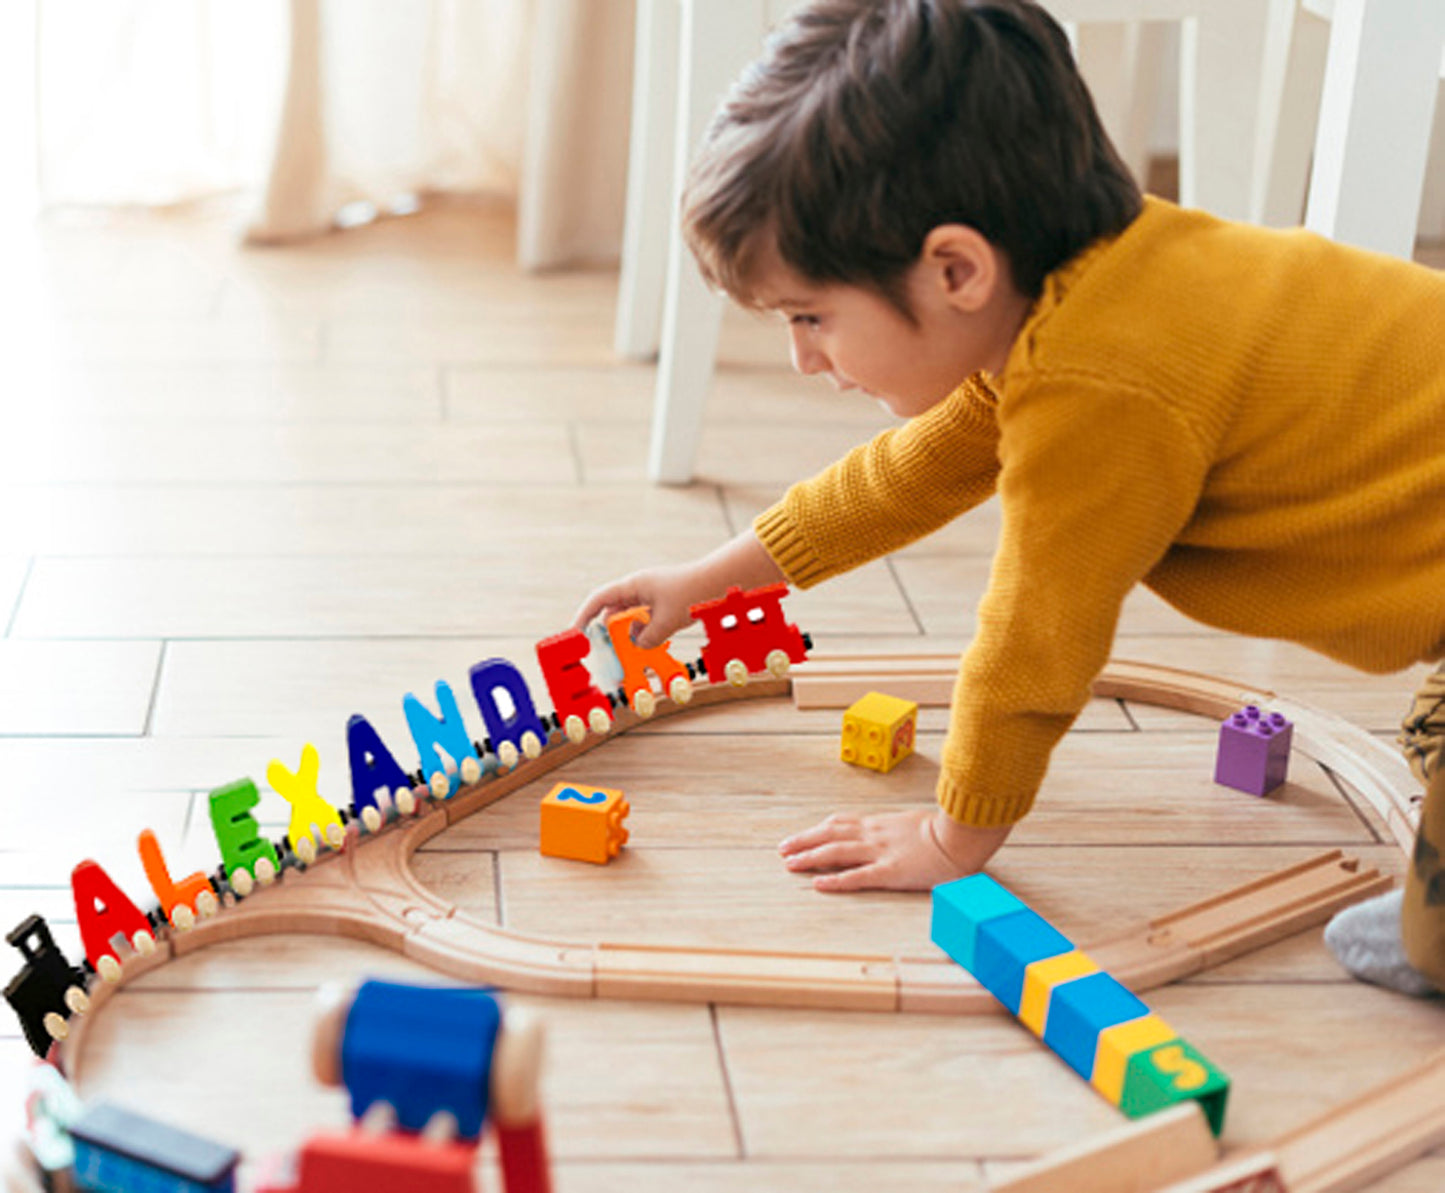 6 Letter Train Wooden Perosnalized Name Letters Includes Train & Wagon Letters Puzzle Includes Train & Wagon Free